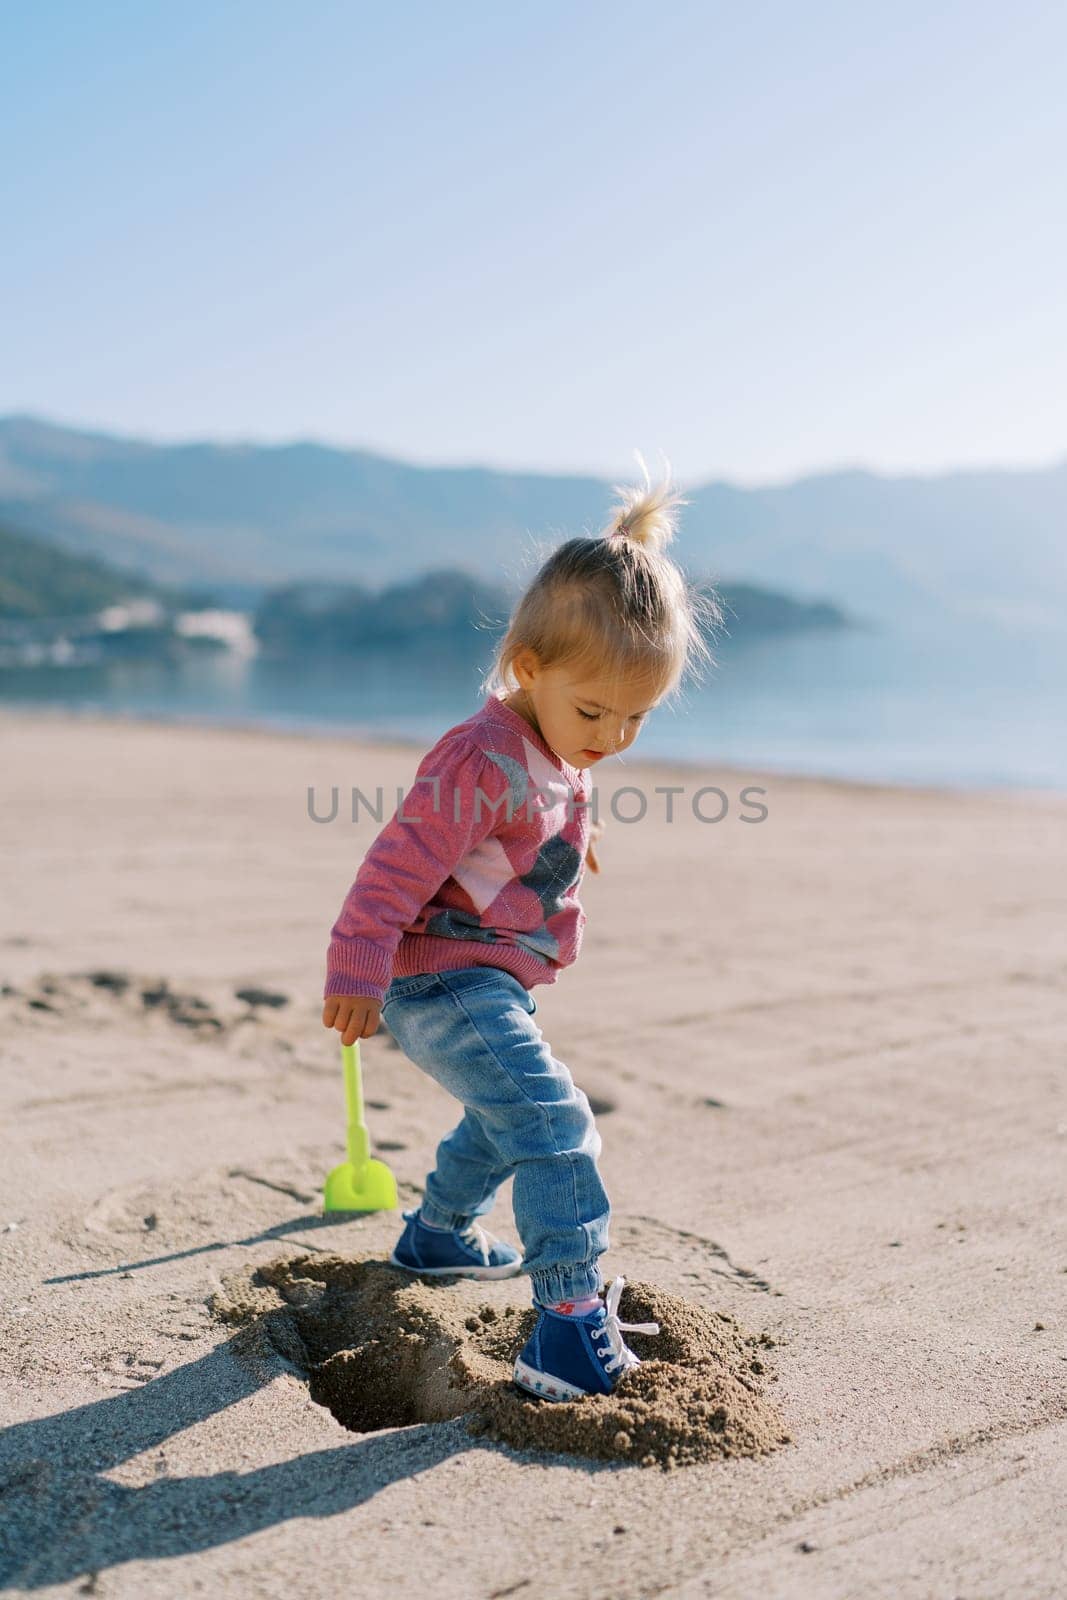 Little girl gets her foot into a hole in the sand on the beach near a toy shovel by Nadtochiy